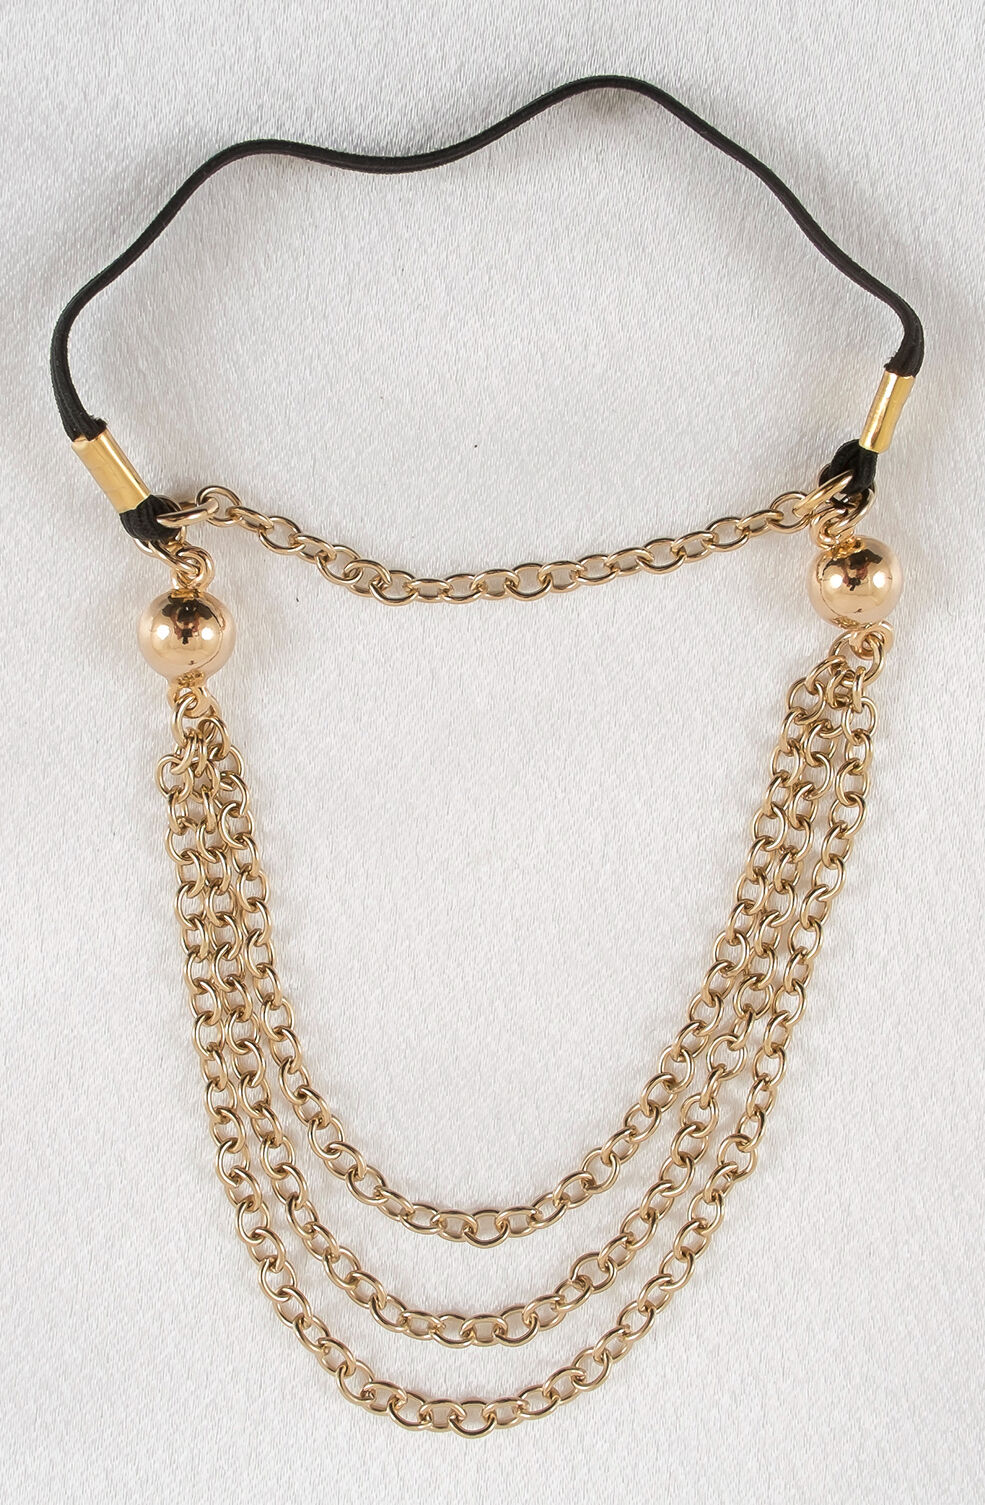 The Sheik - Penis Jewelry With Draped Gold Testicle Chains